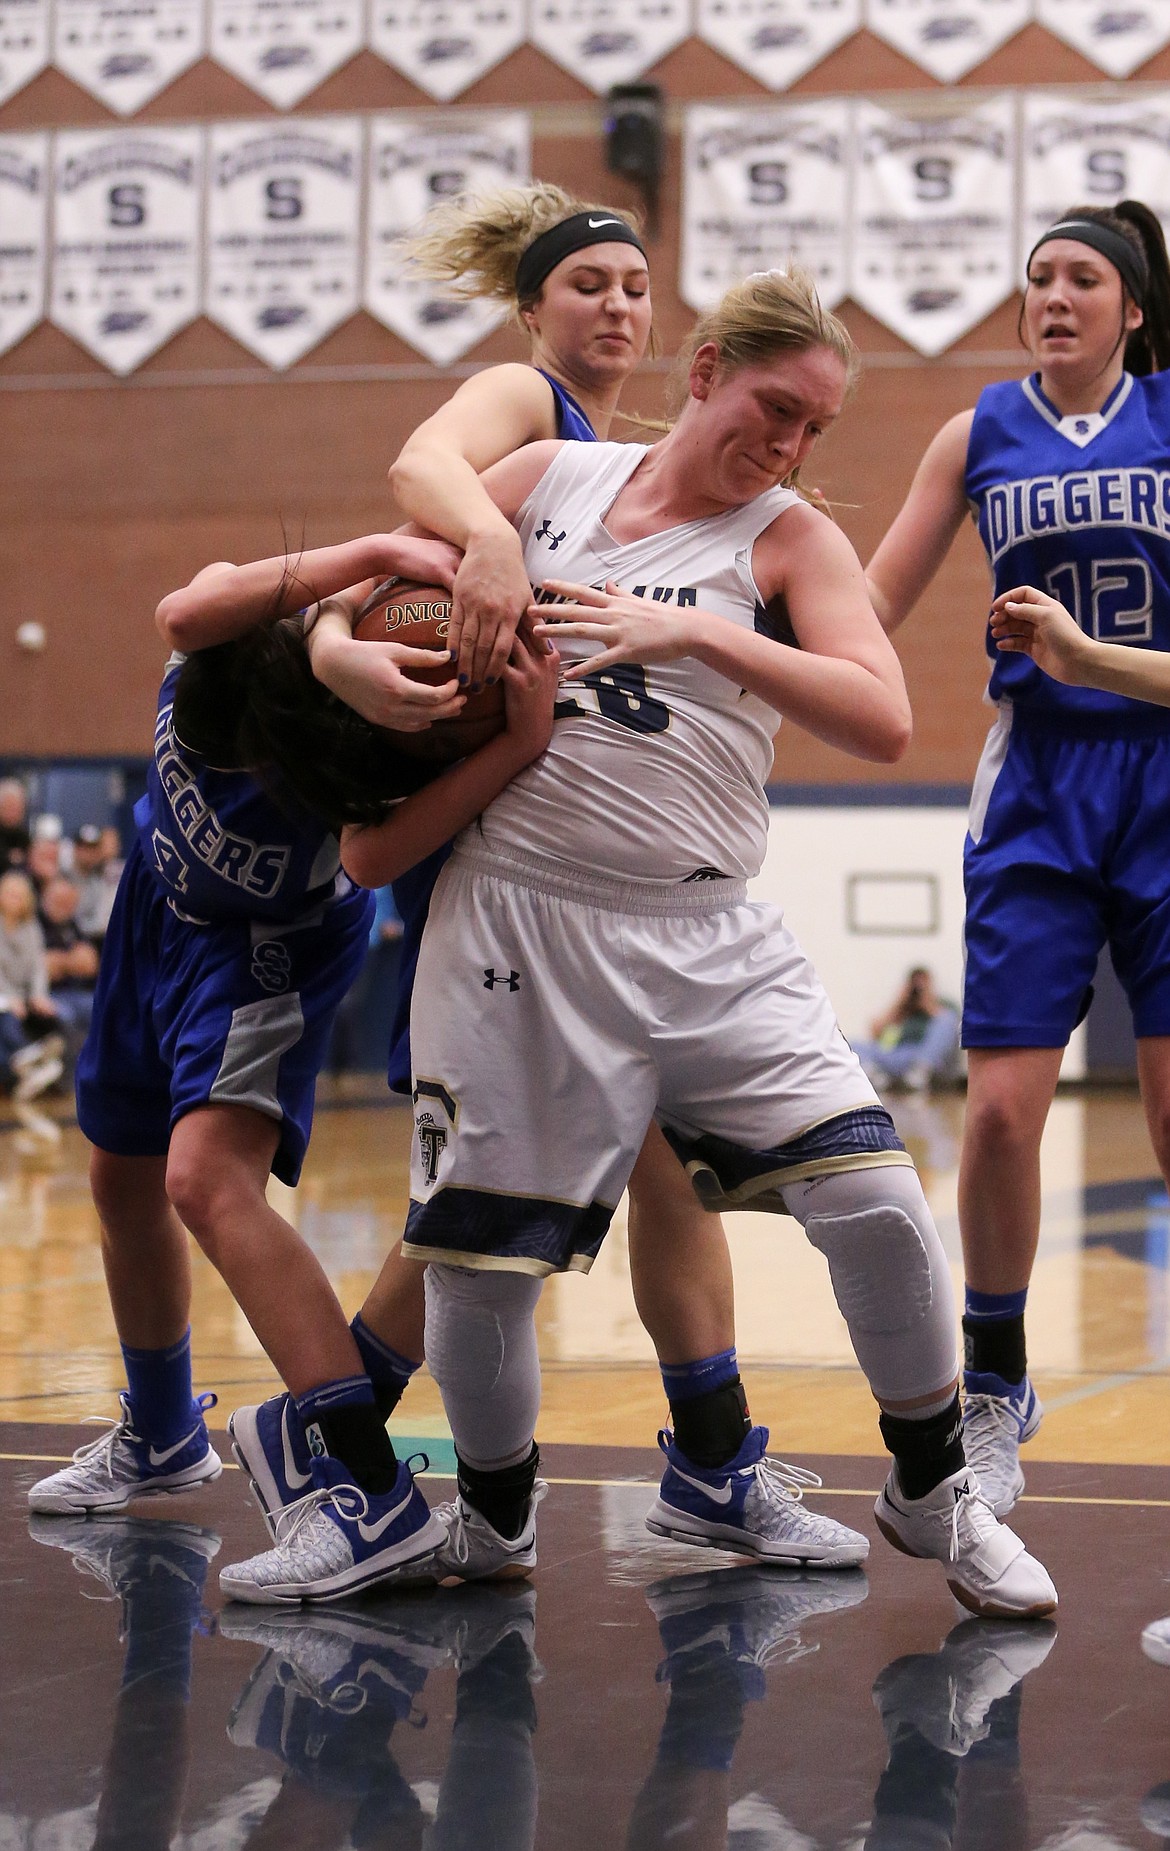 JASON DUCHOW PHOTOGRAPHY
Brooke Jessen of Timberlake battles a pair of Sugar-Salem players for the ball during a state 3A semifinal game Friday night at Skyview High in Nampa.